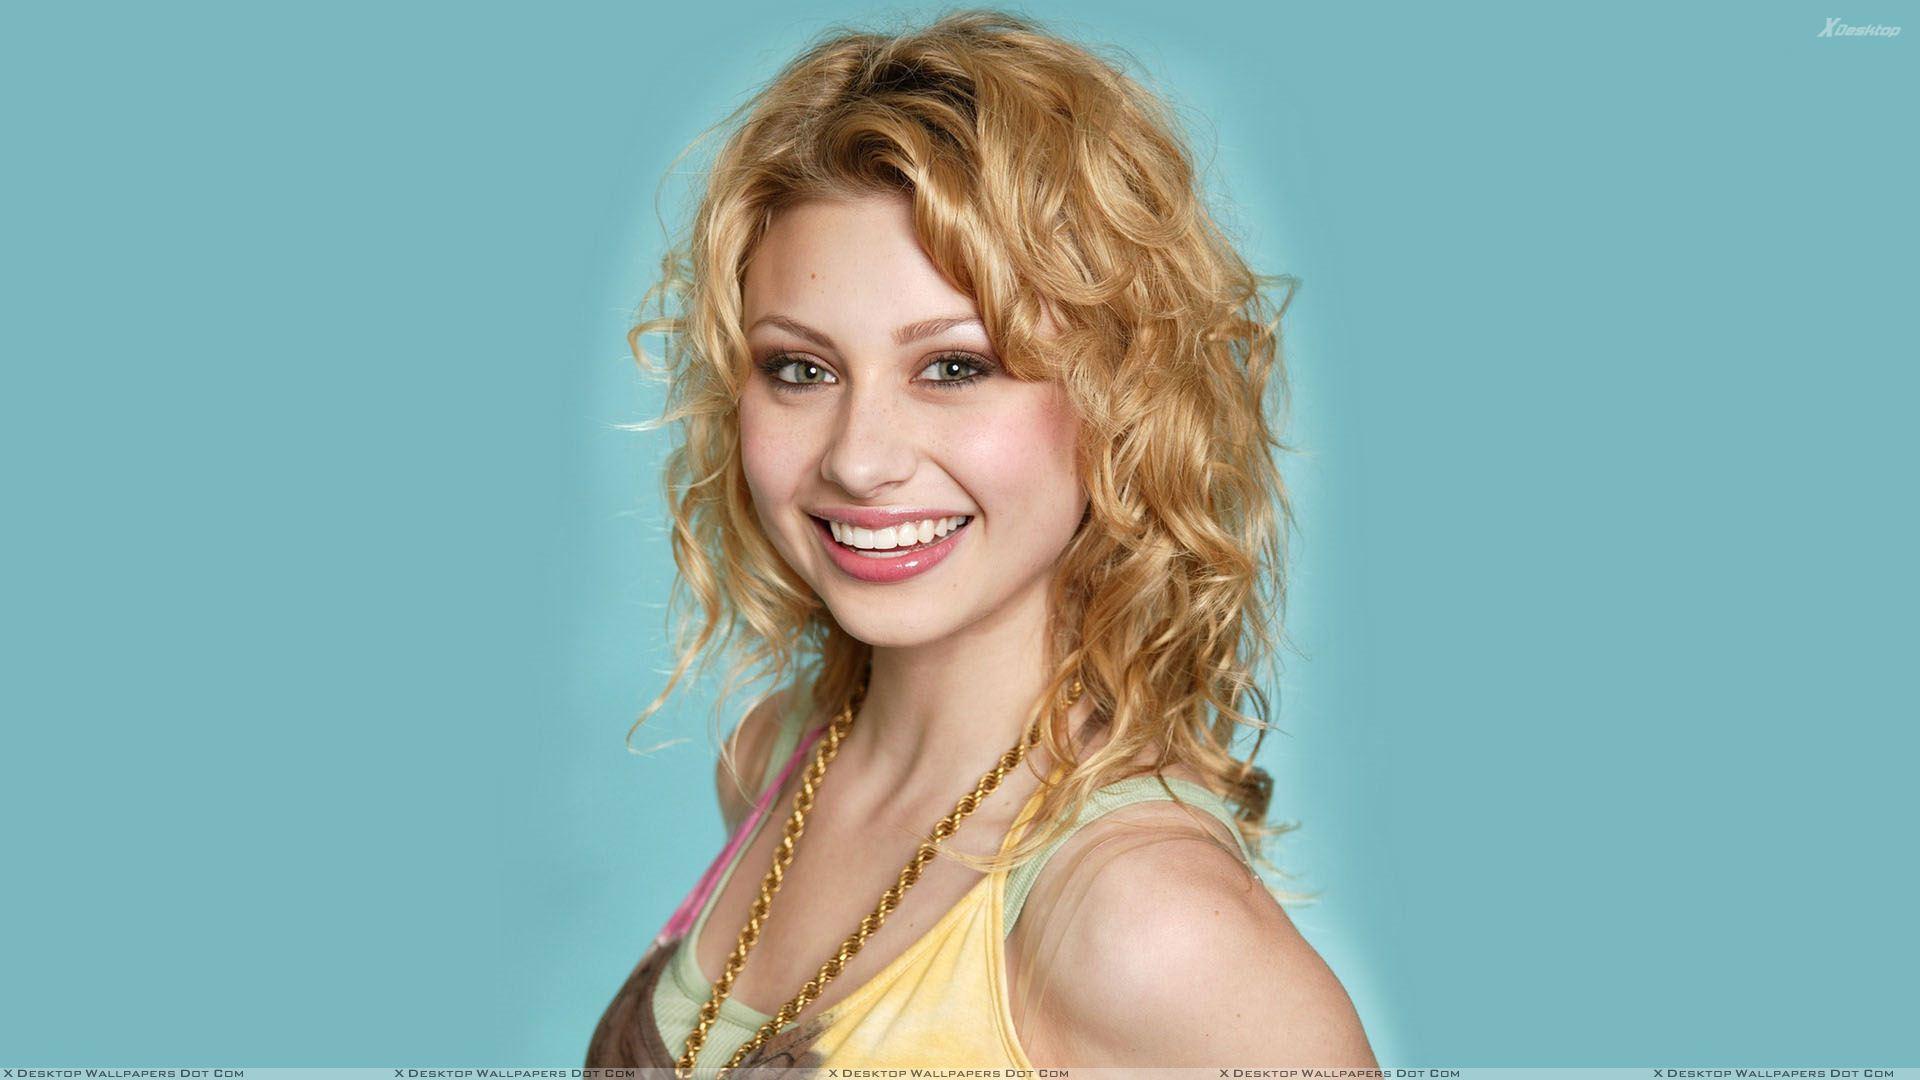 Aly Michalka Sweet Laughing Face N Blue Background Wallpaper